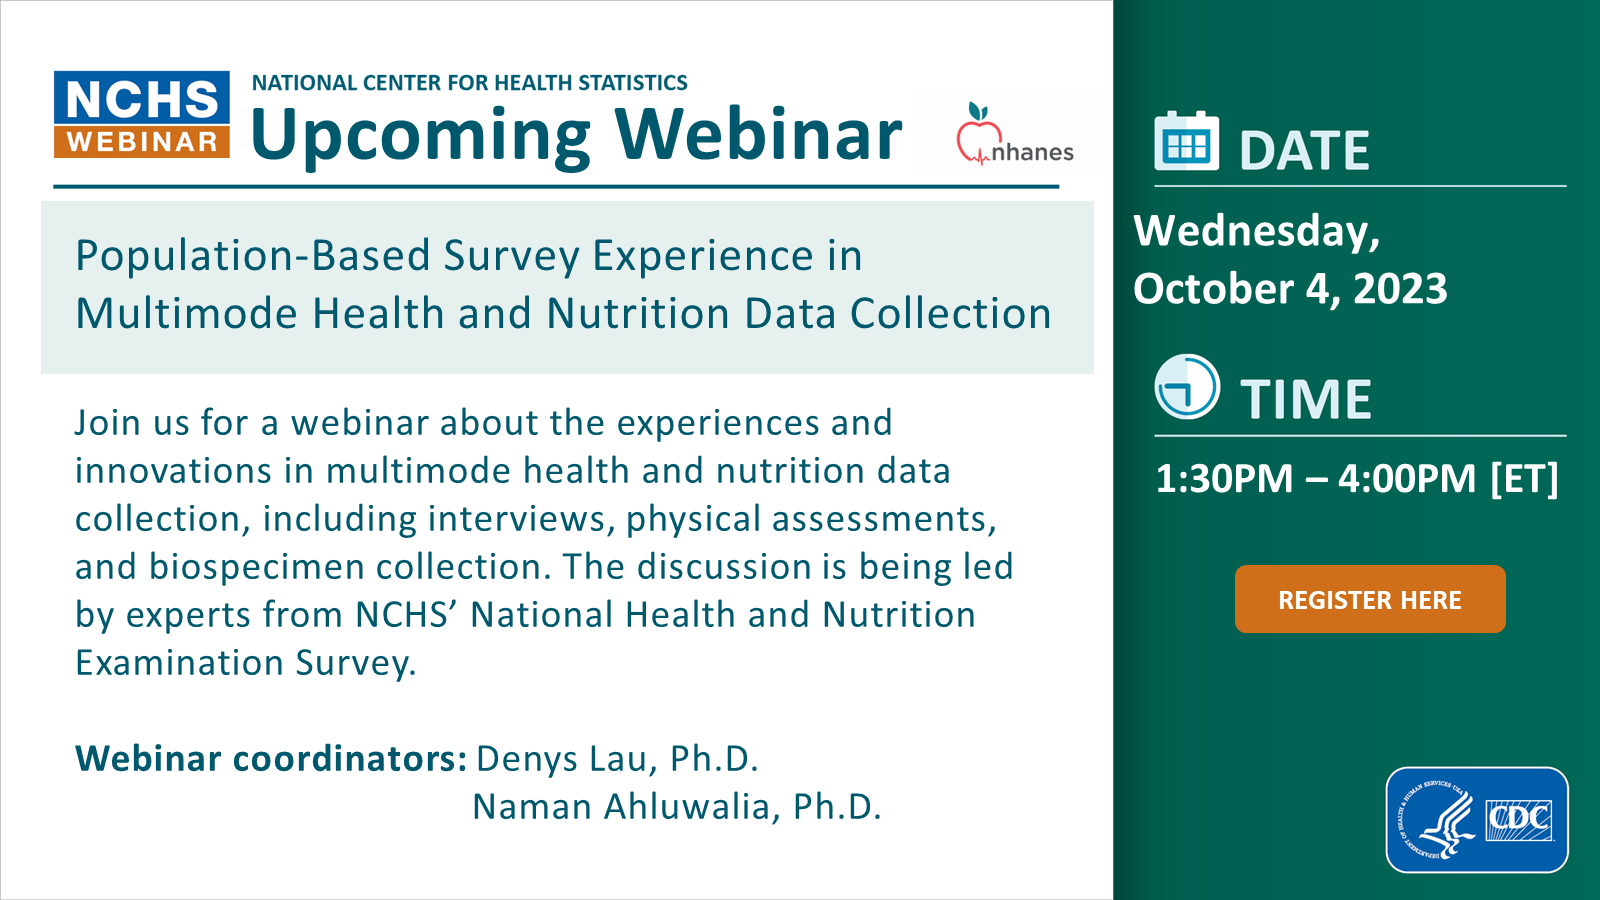 NHANES Webinar taking place October 4th. Click here to register.